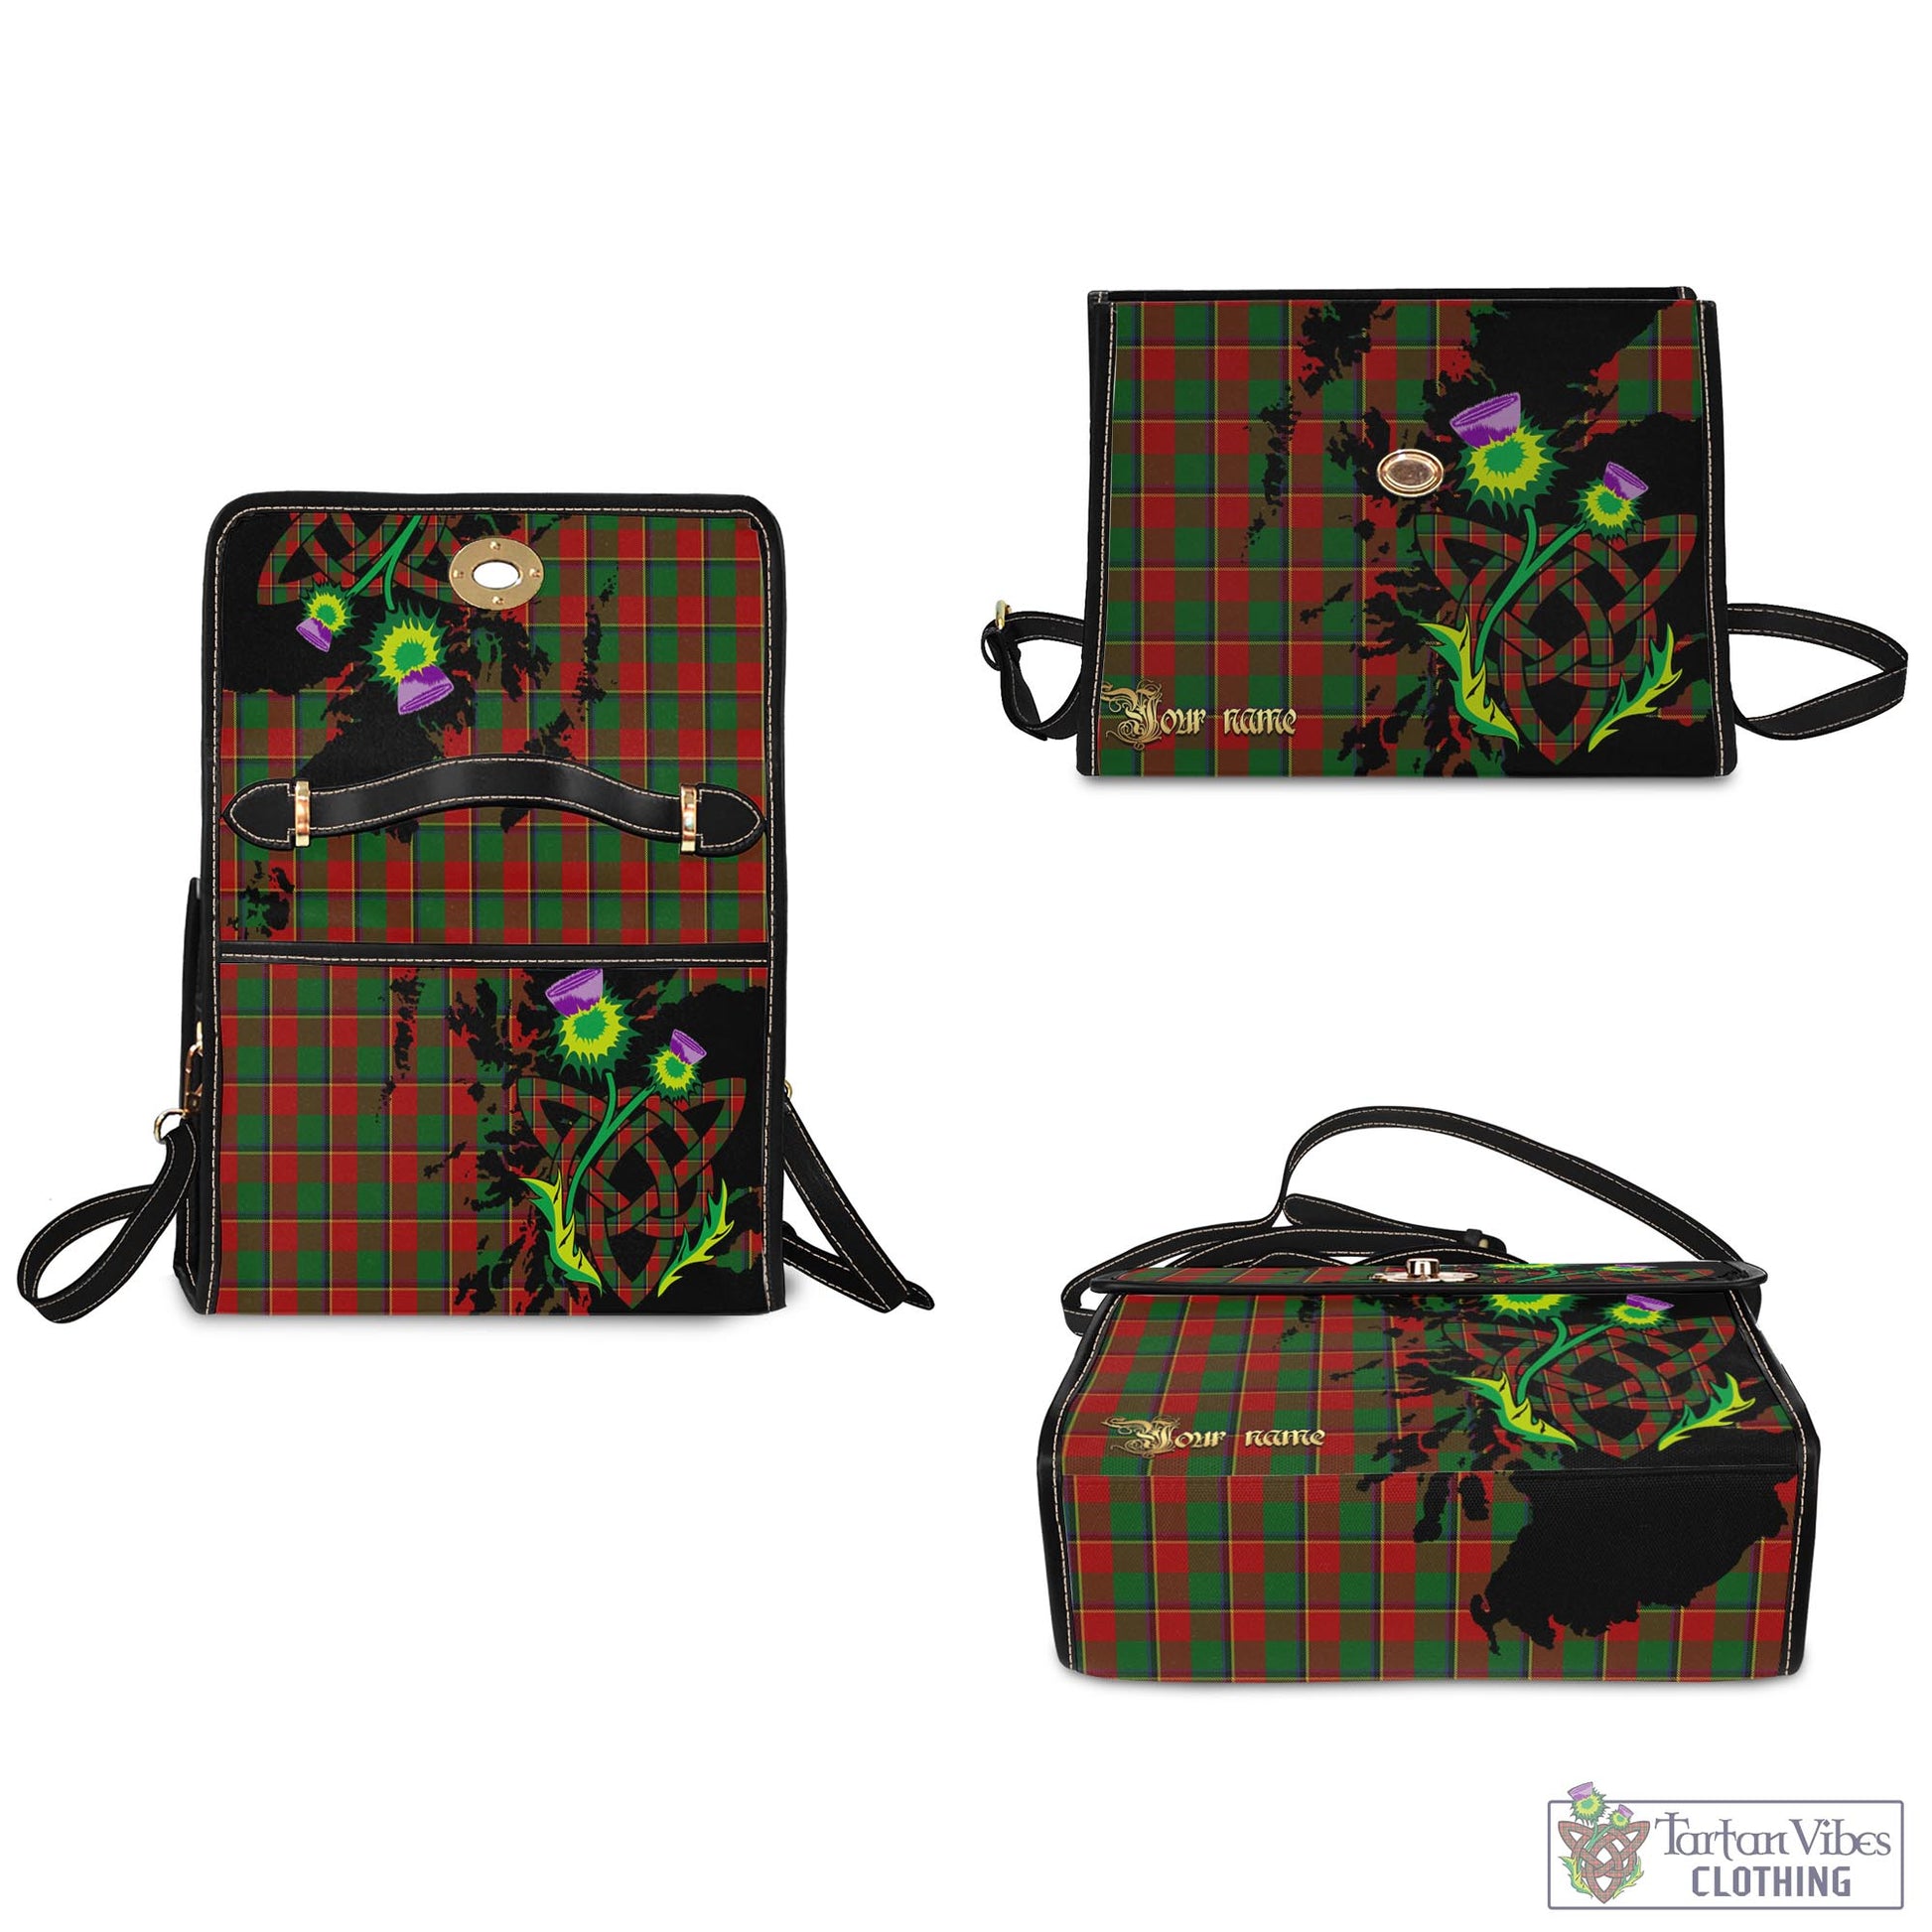 Tartan Vibes Clothing Turnbull Dress Tartan Waterproof Canvas Bag with Scotland Map and Thistle Celtic Accents